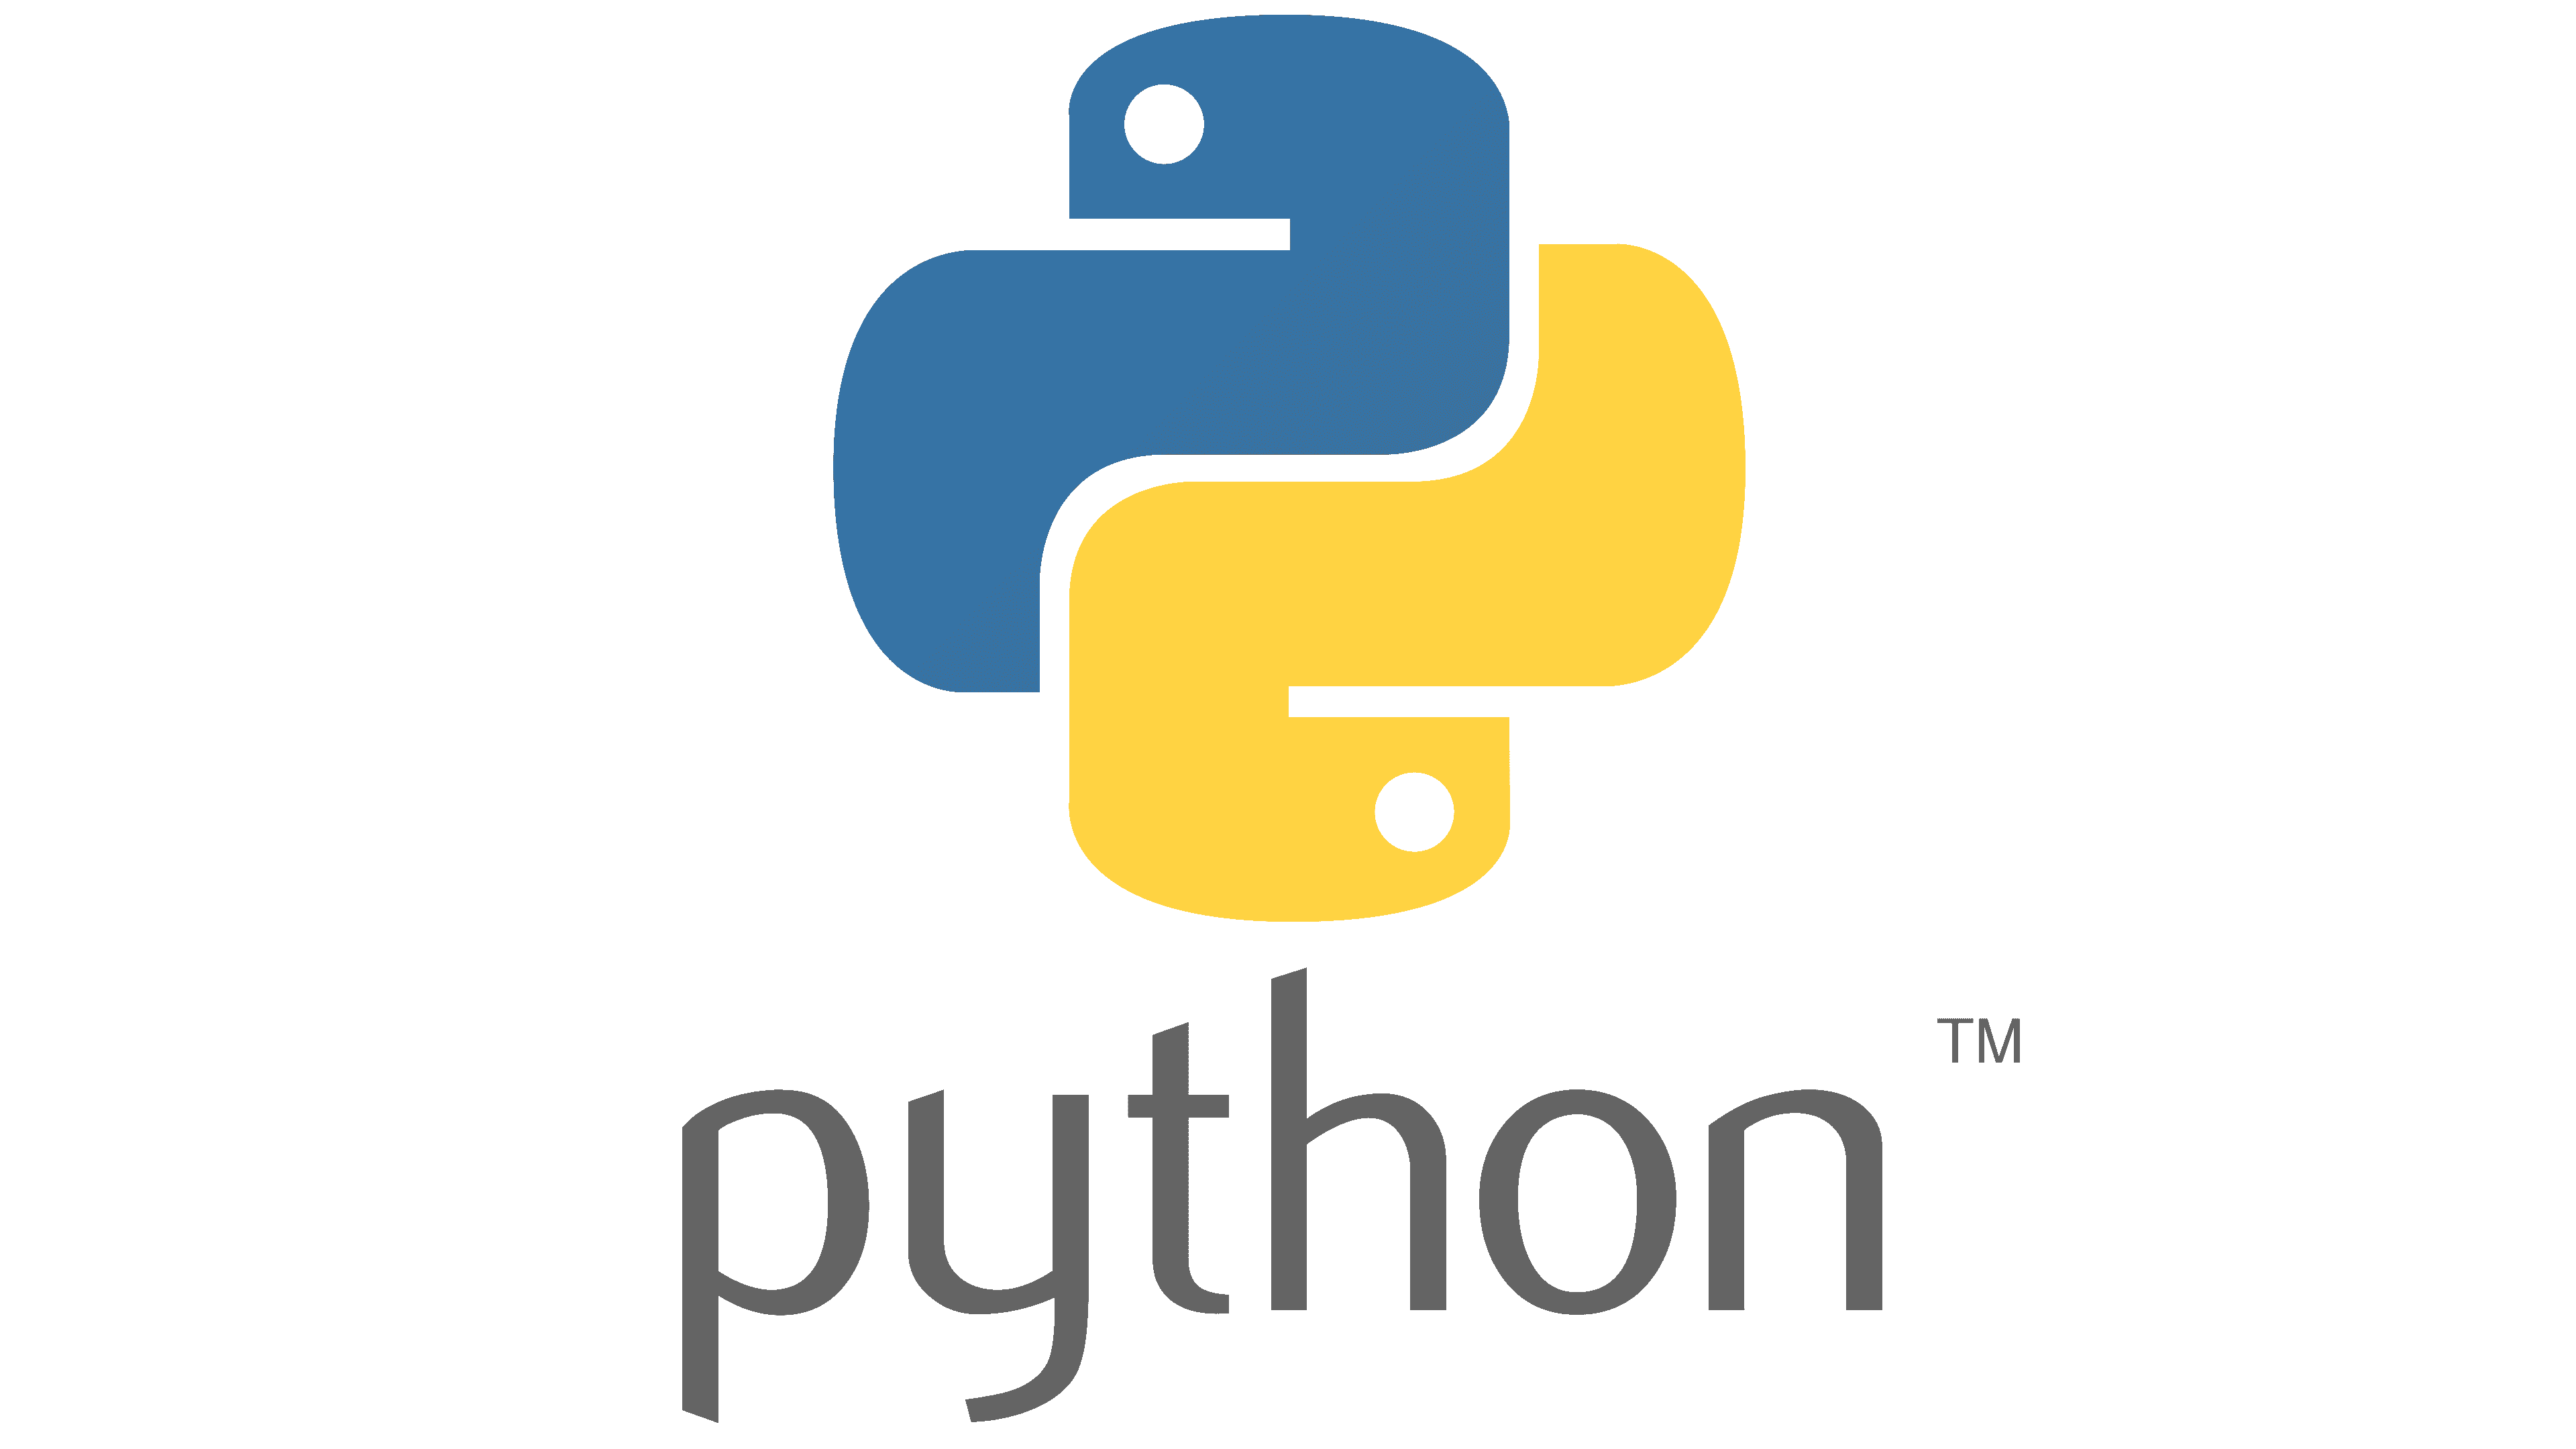 Comparing Python and Ruby: A Look at Their Strengths, Weaknesses, and Differences